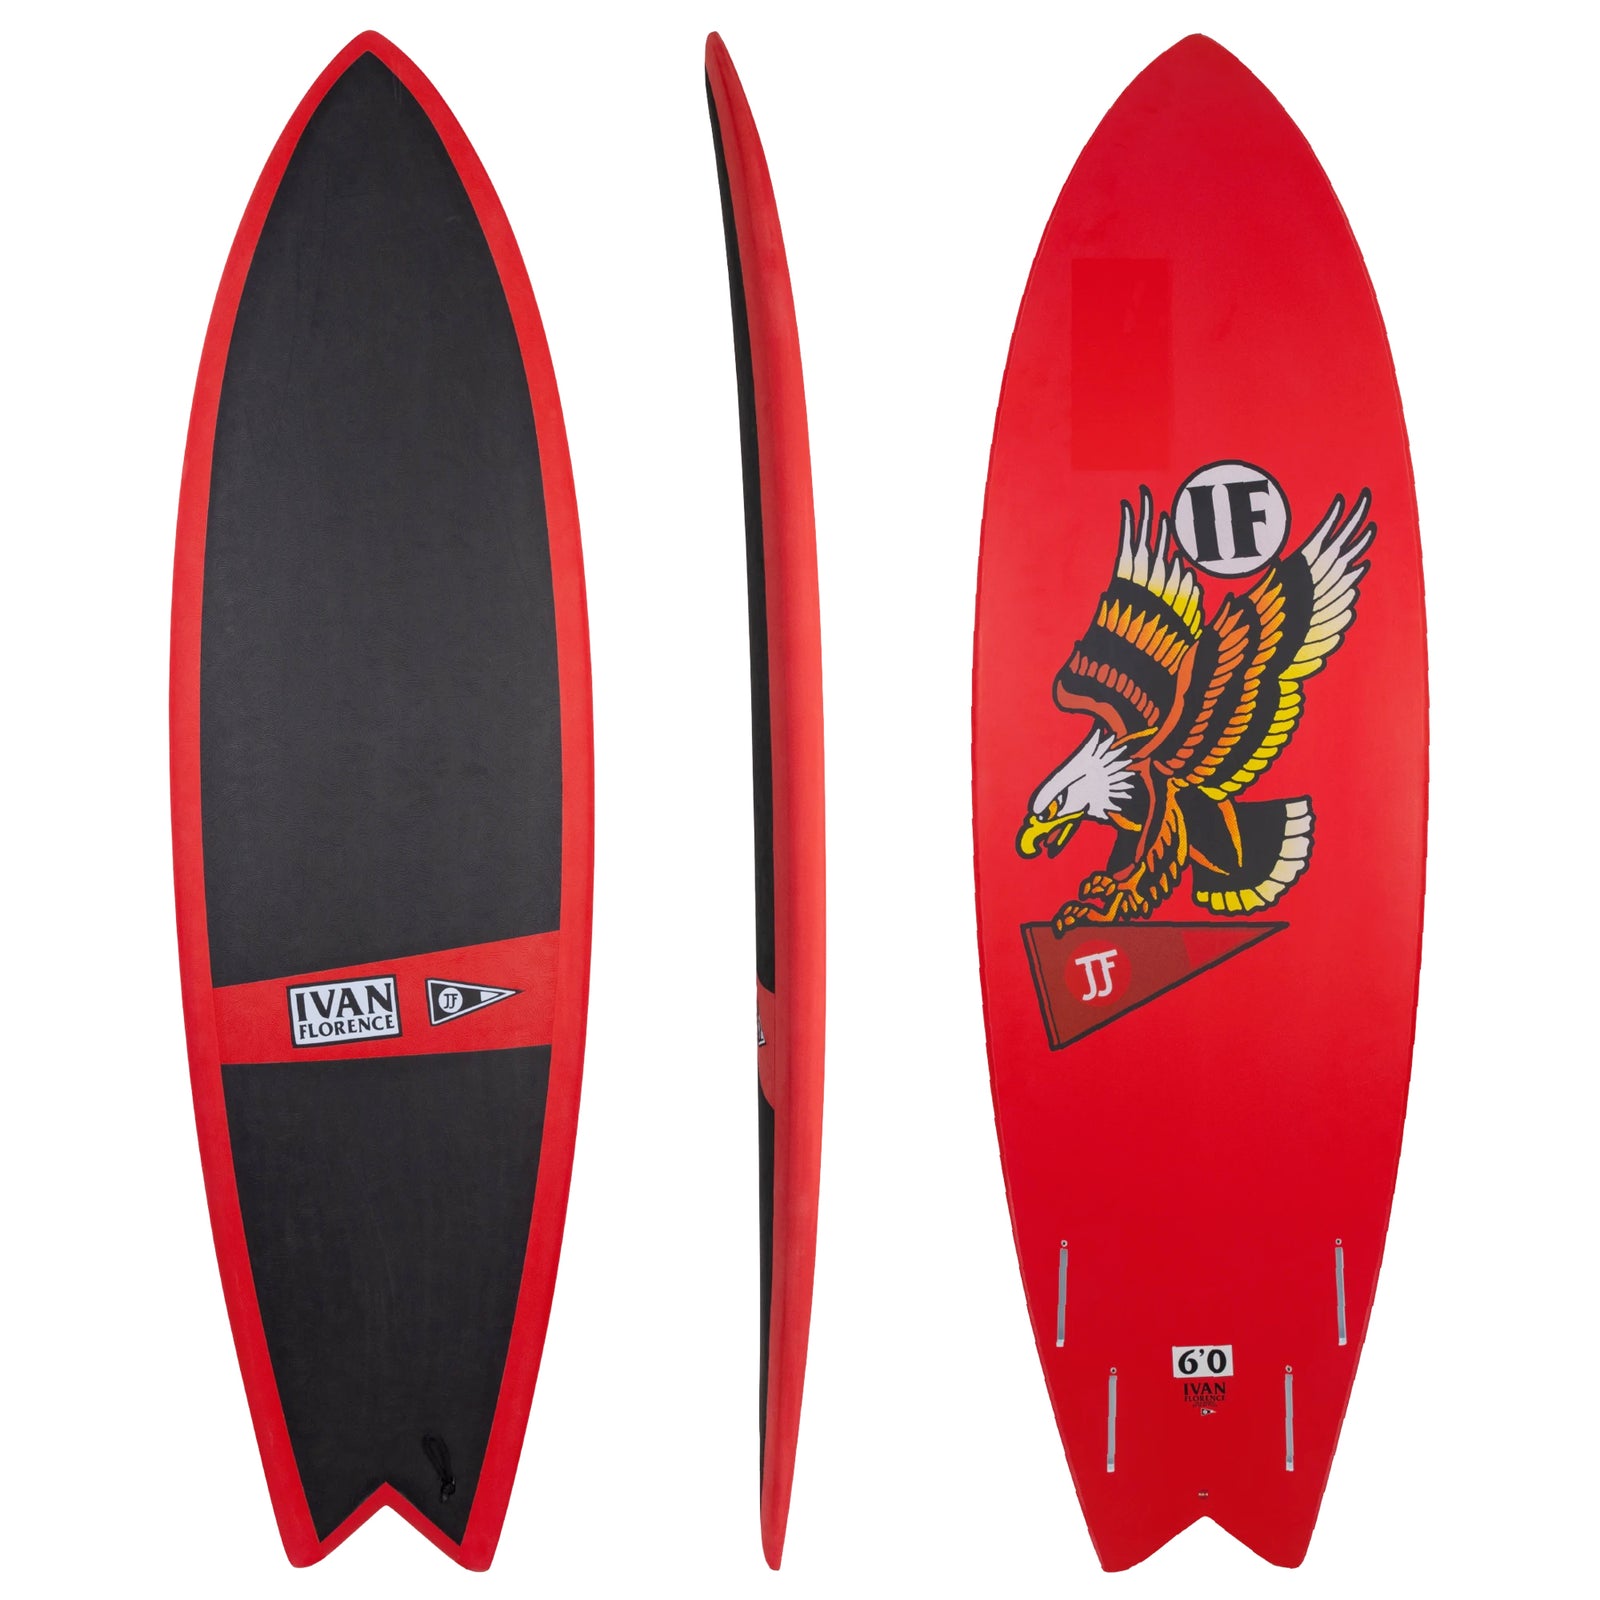 JJF by Pyzel Soft Surfboards - Surf Station Store